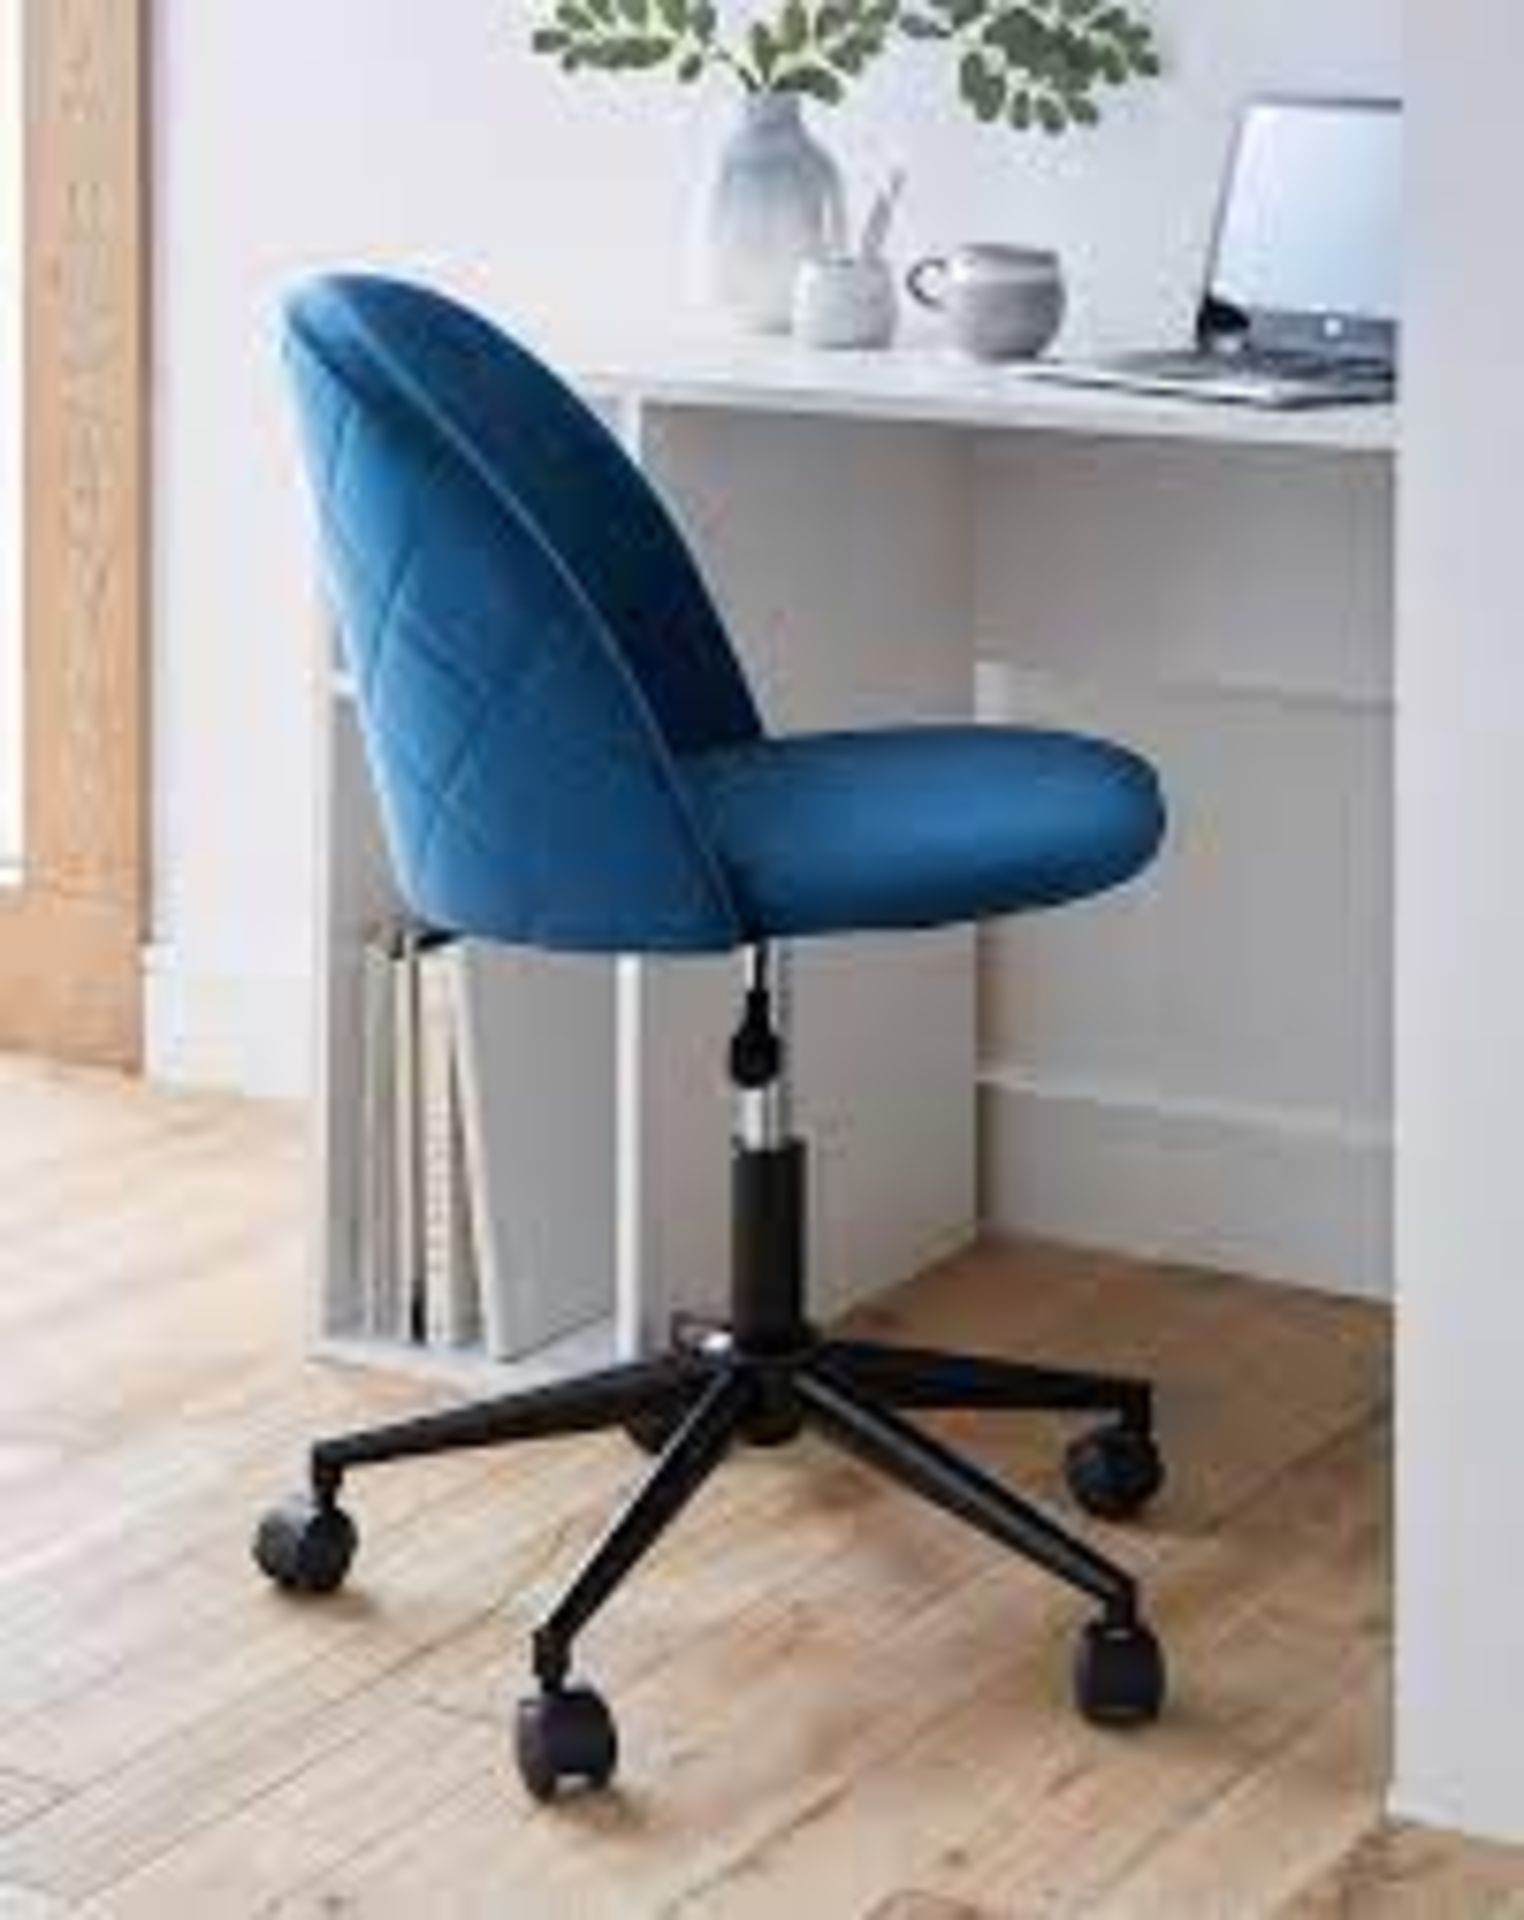 NEW & BOXED Klara Office Chair - NAVY. RRP £119 EACH. The Klara Office Chair is a luxurious and